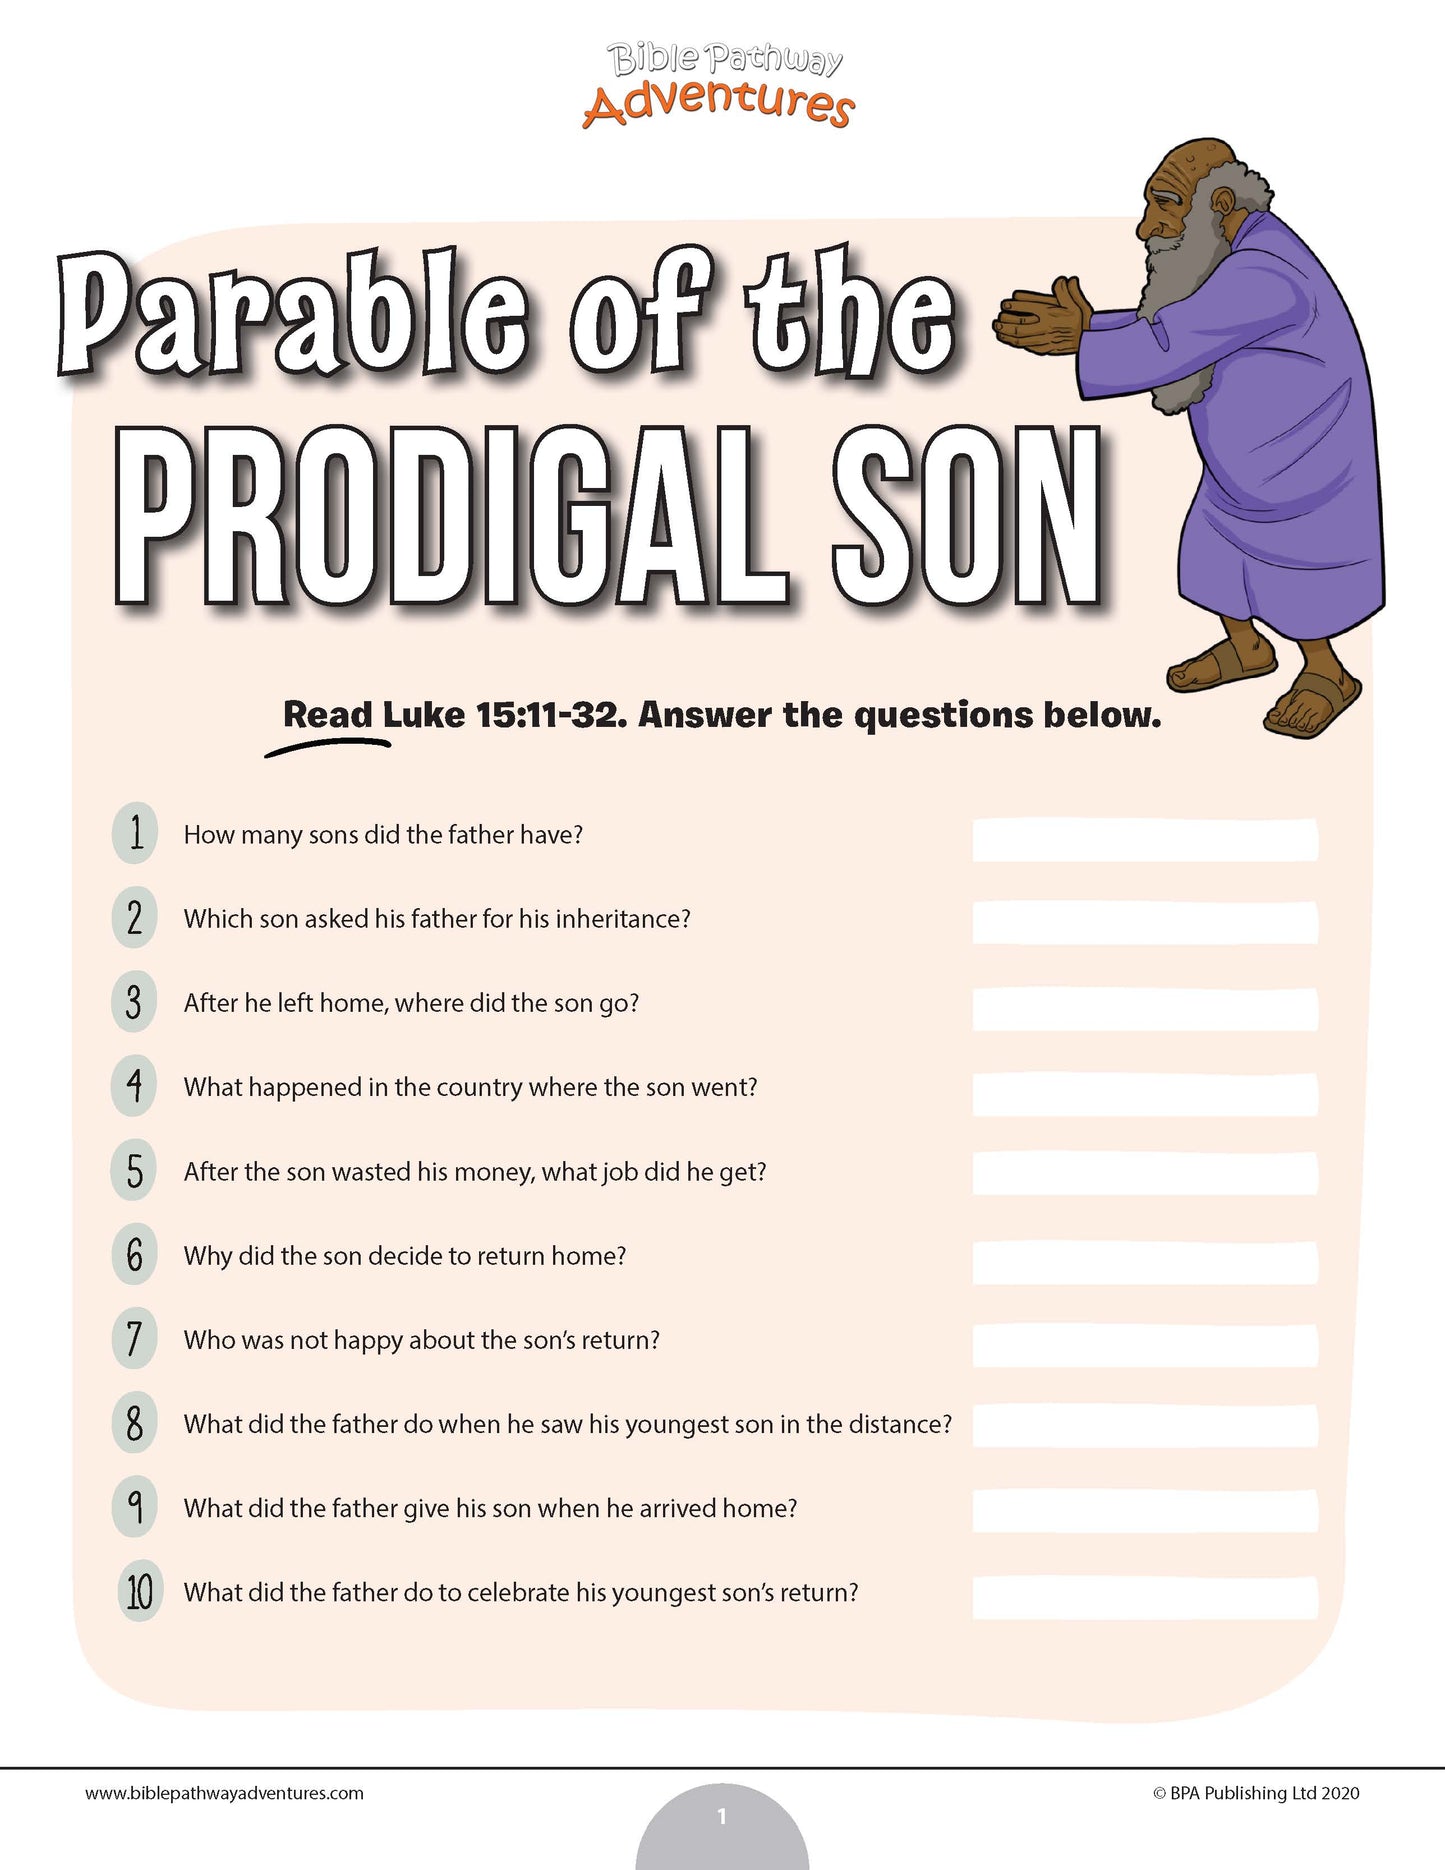 Parable of the Prodigal Son (PDF)